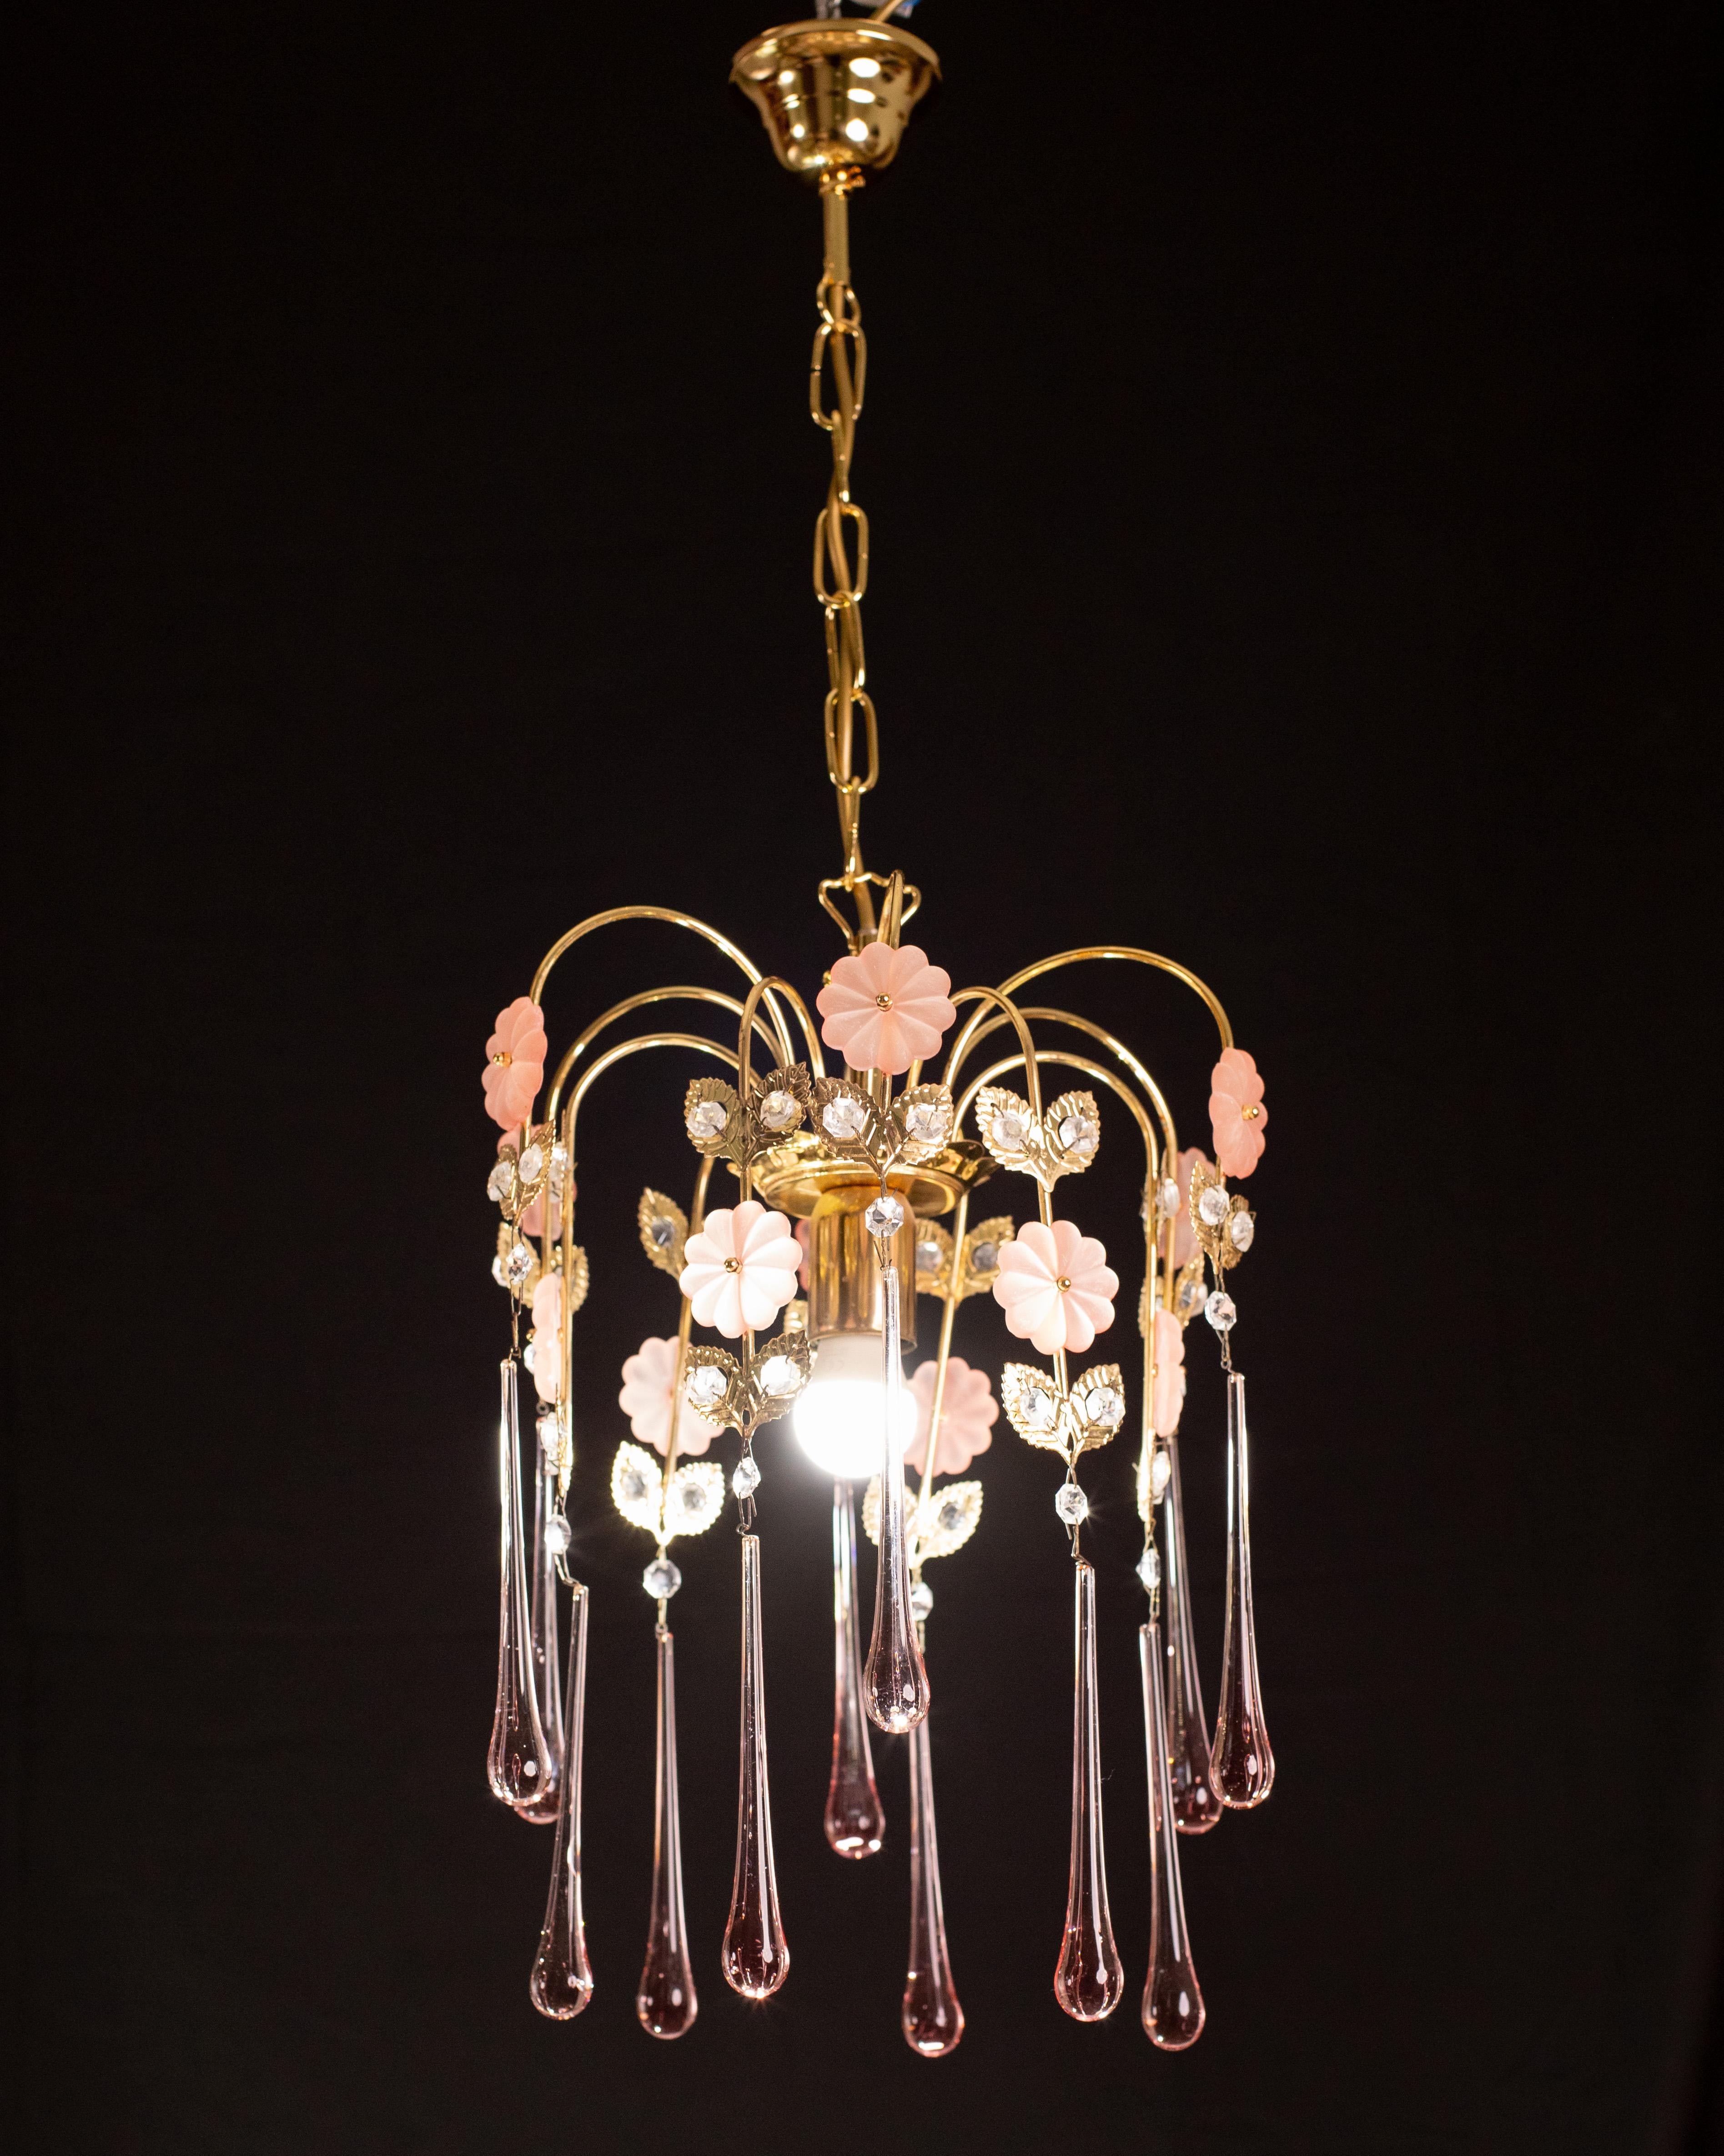 Gorgeous Murano chandelier in the style of Venini La Cascata.
The chandelier consists of a three rounds composed of beautiful transparent pink drops cascading down, the round is completed by pink glass flowers on the structure.
The chandelier